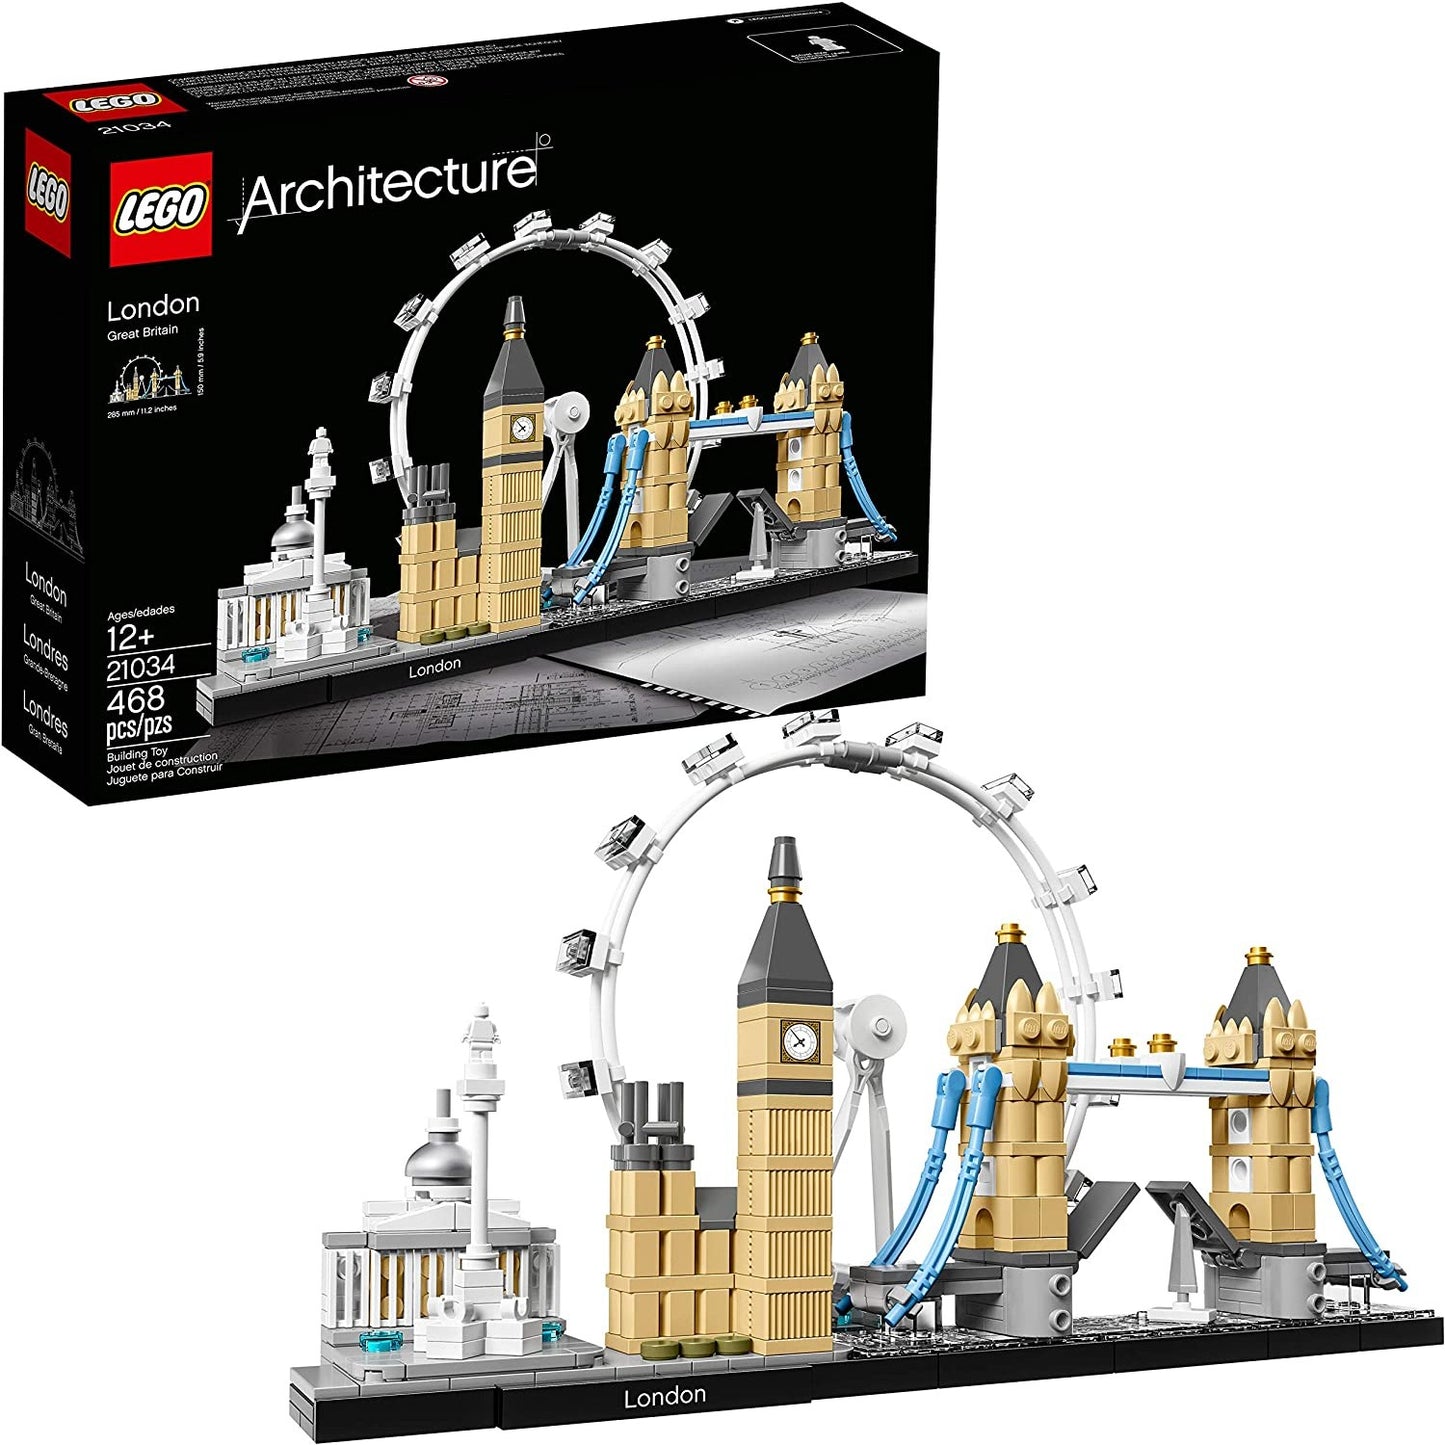 A Lego building set which allows you to build the UK's London skyline. There is a completed model sitting in front of the box the kit comes in.